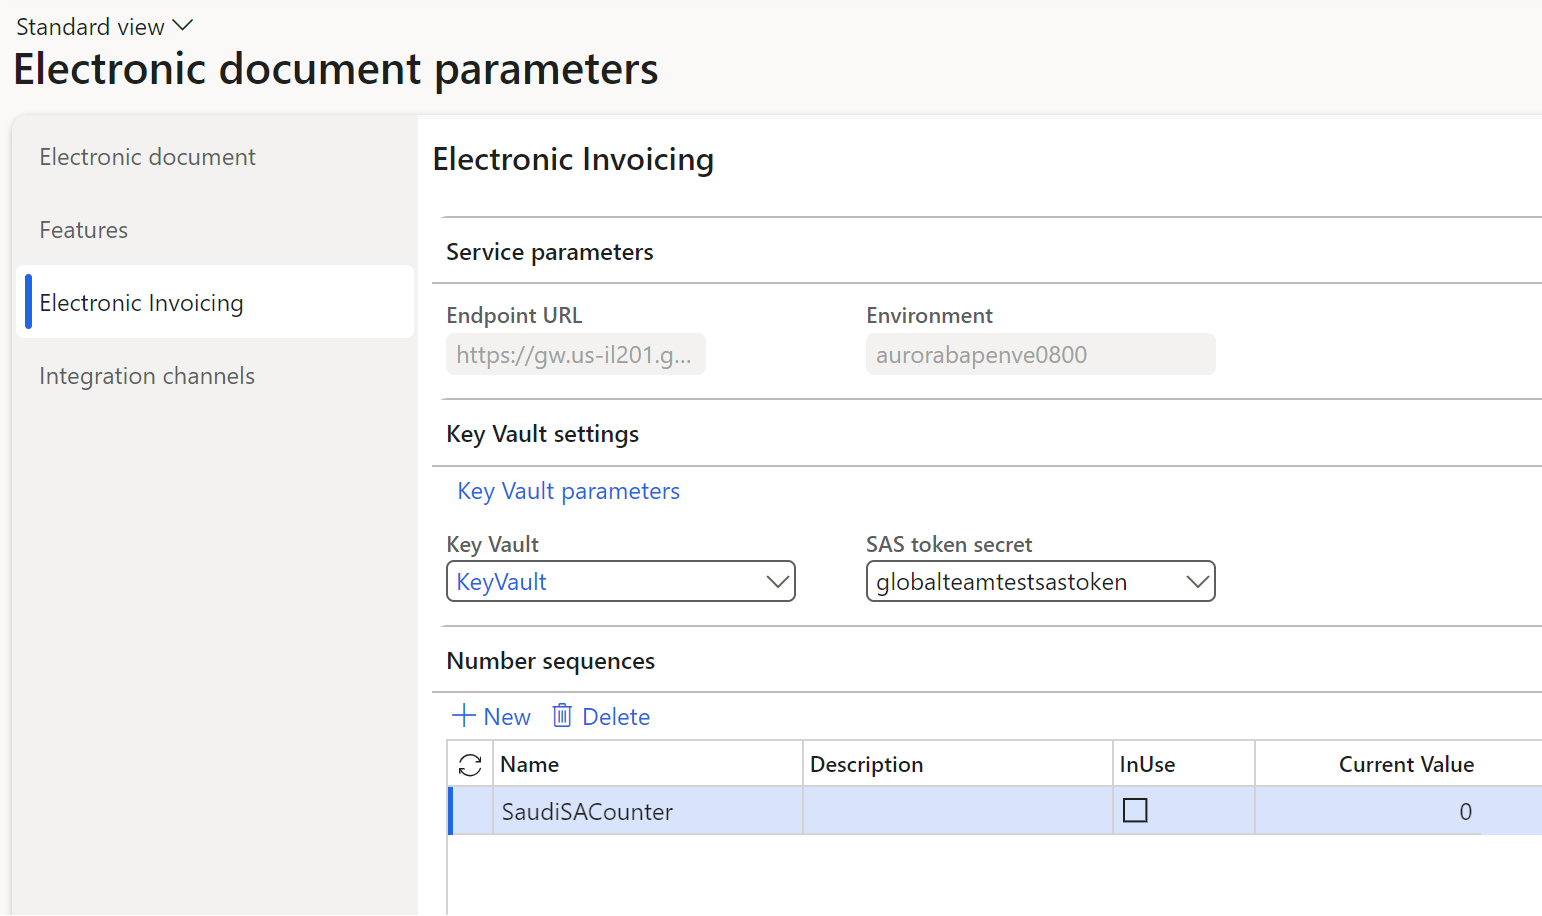 Screenshot that shows the Environment field for a service environment unavailable on the Electronic document parameters page.